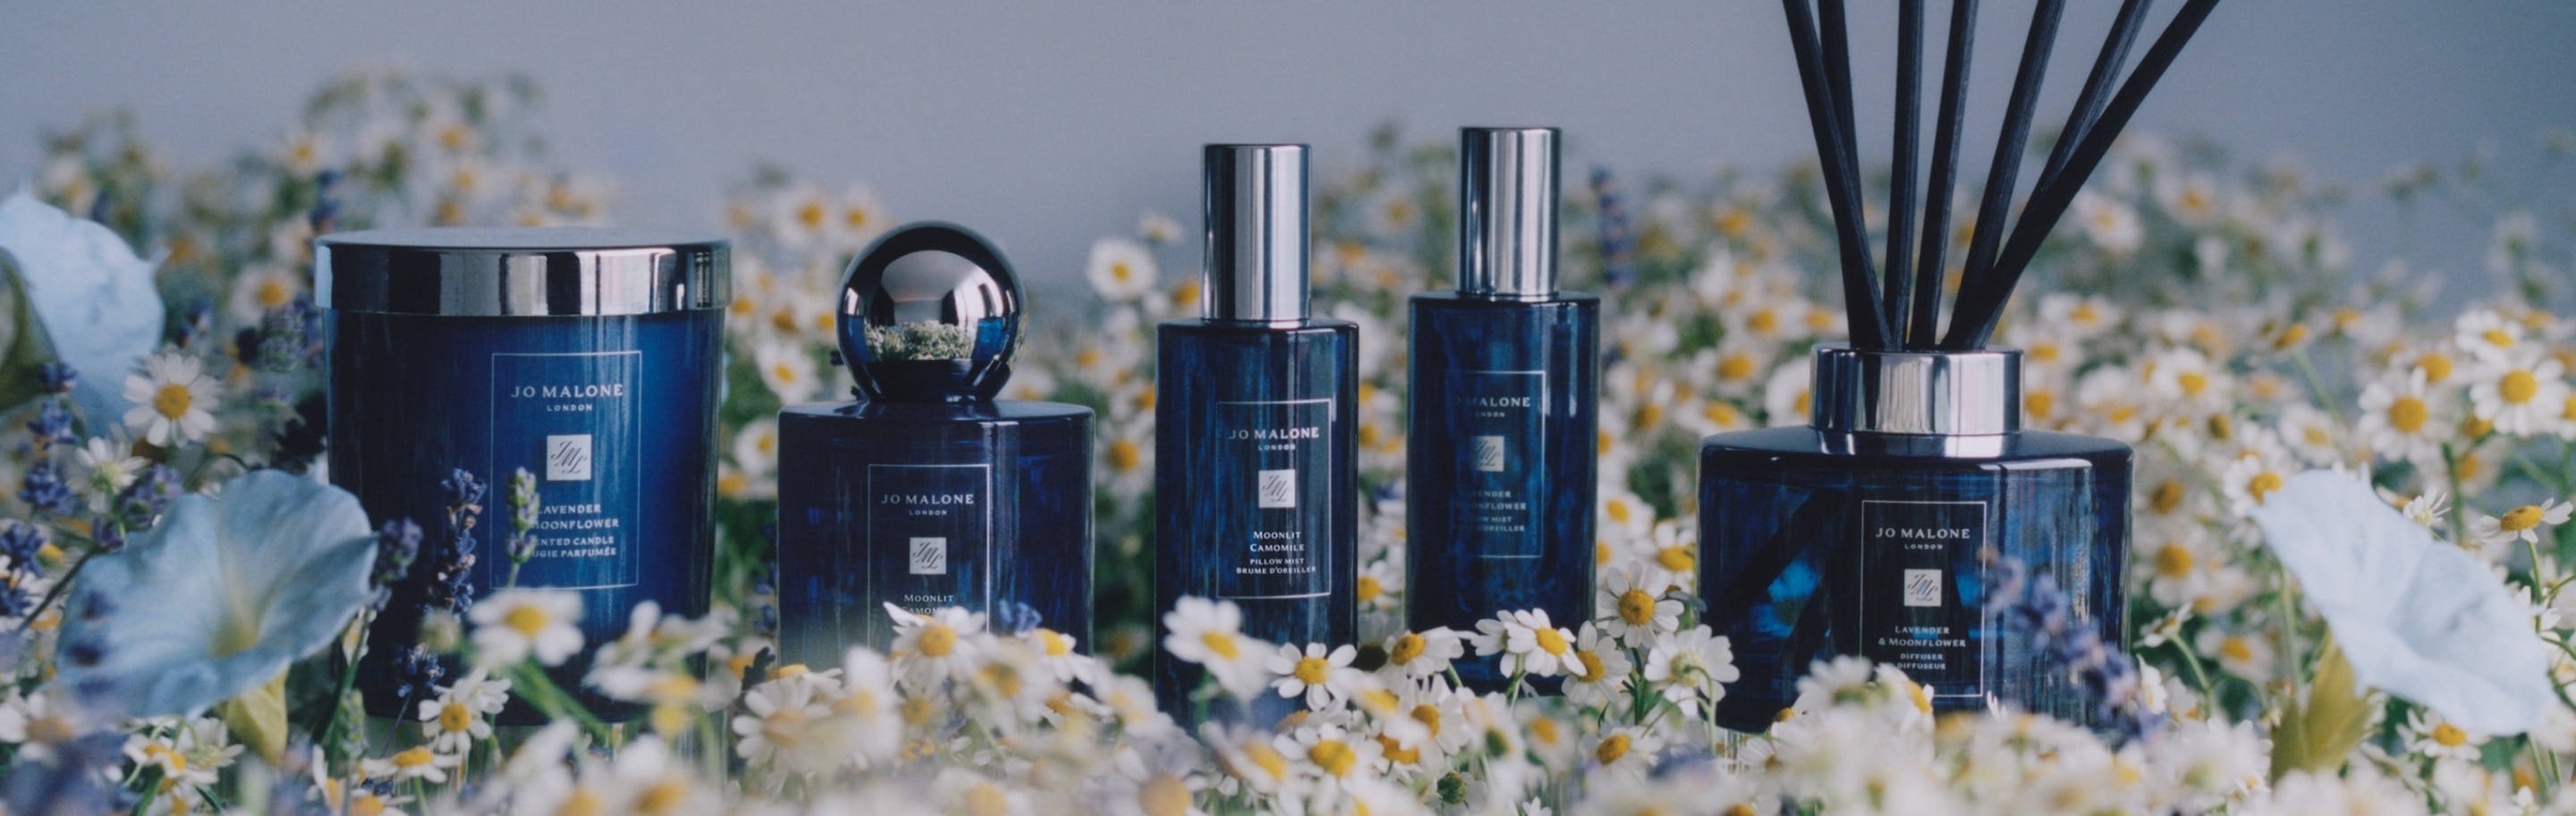 Jo Malone London Night Collection surrounded by flowers 